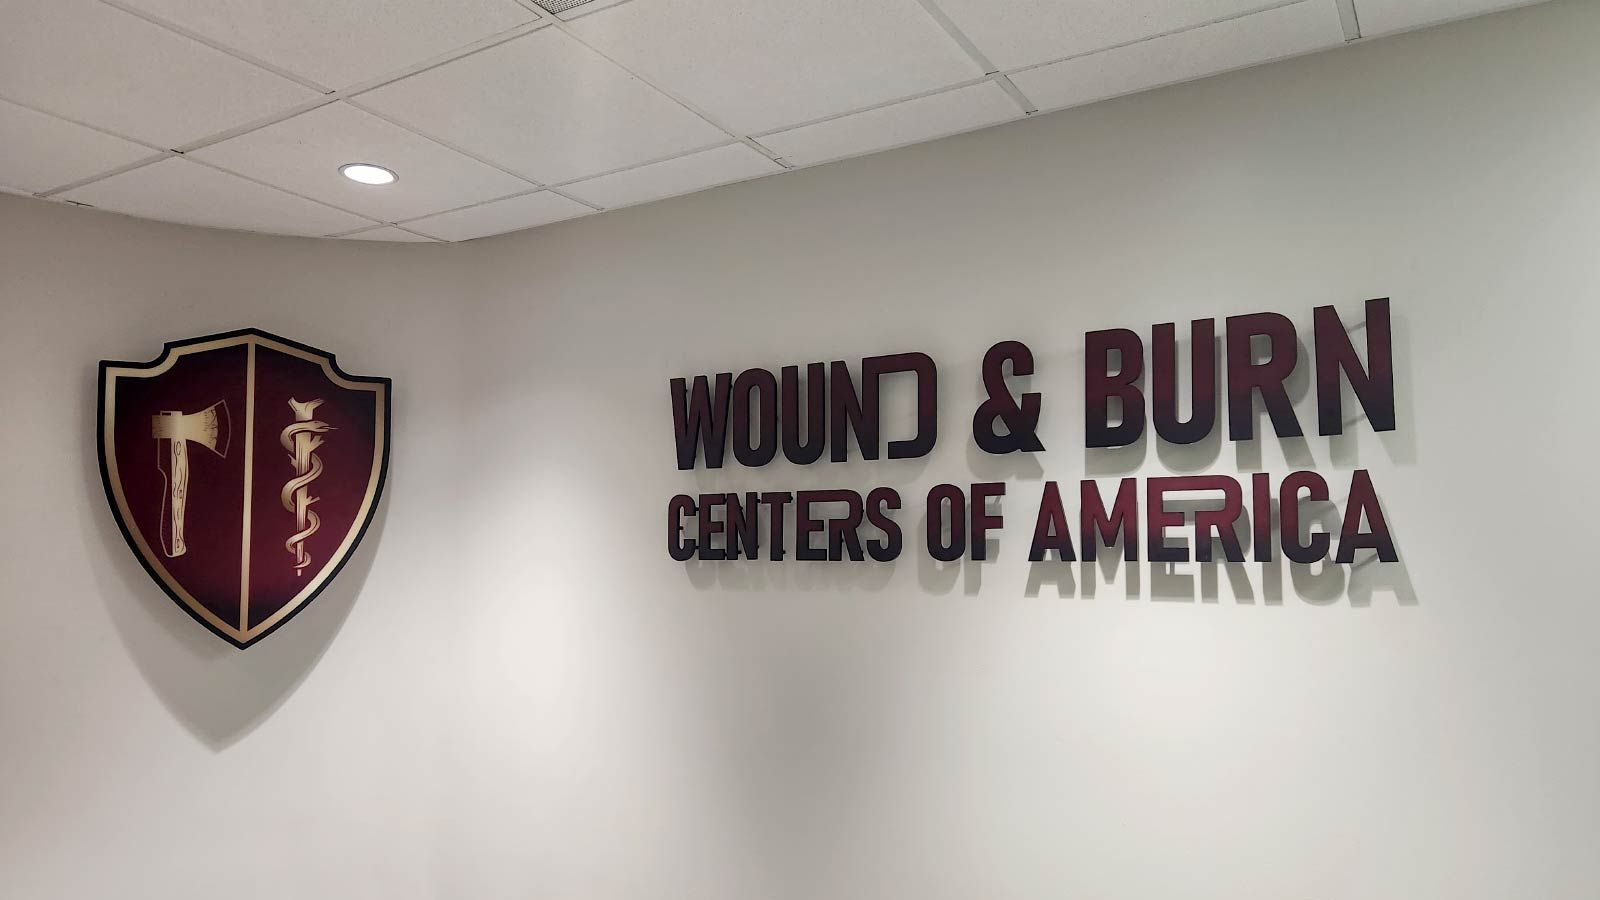 Wound and Burn Centers of America interior signs on walls